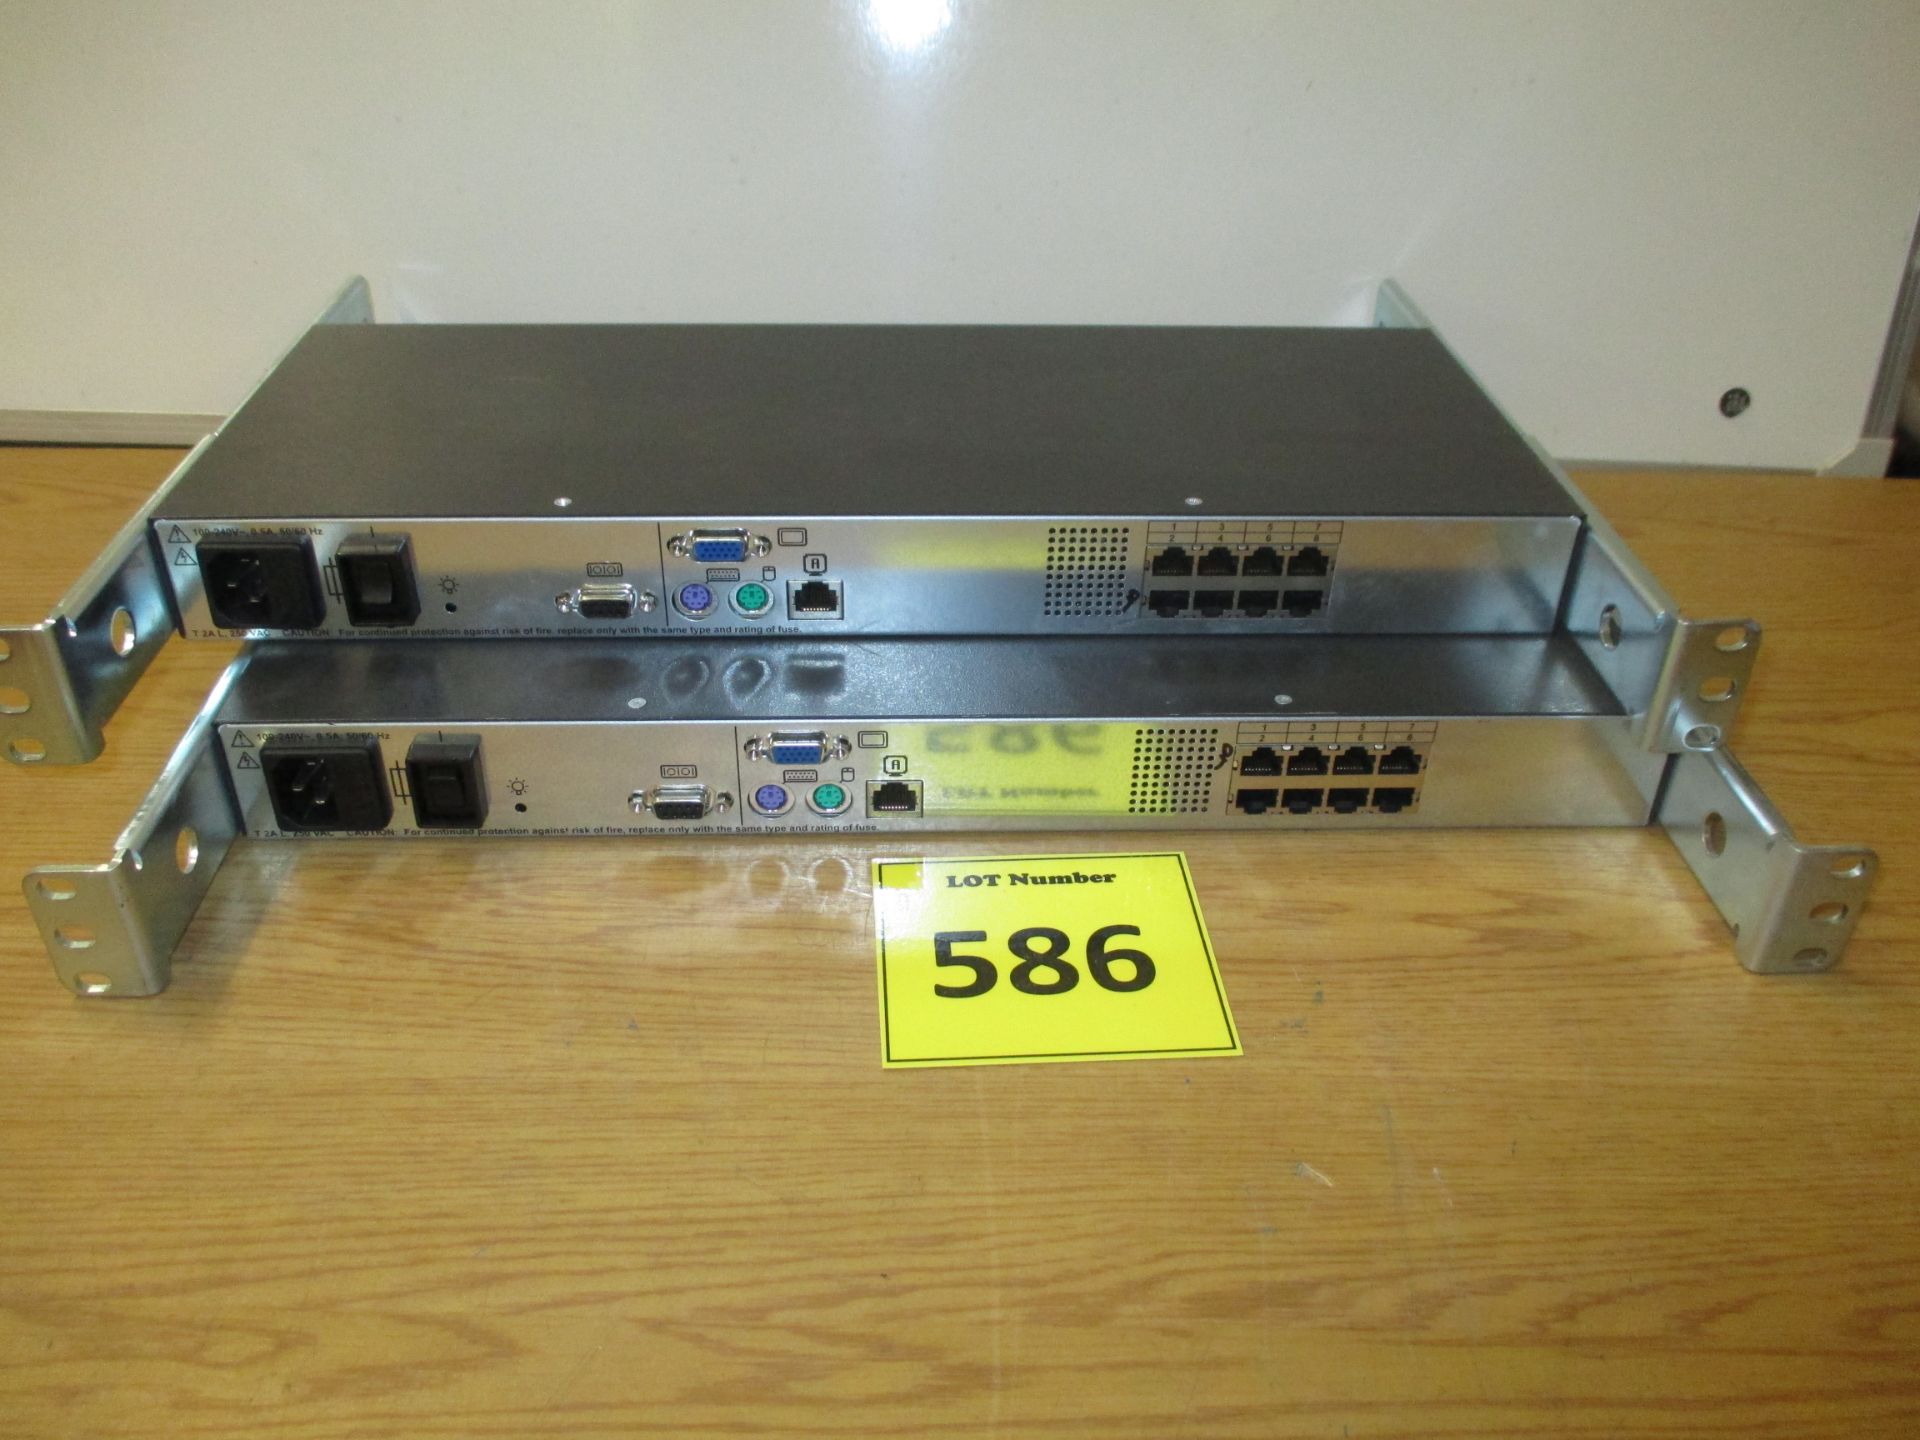 2 X HP EO1013 8 Port KVM Switches - 520-343-004 . Complete with rackmount brackets